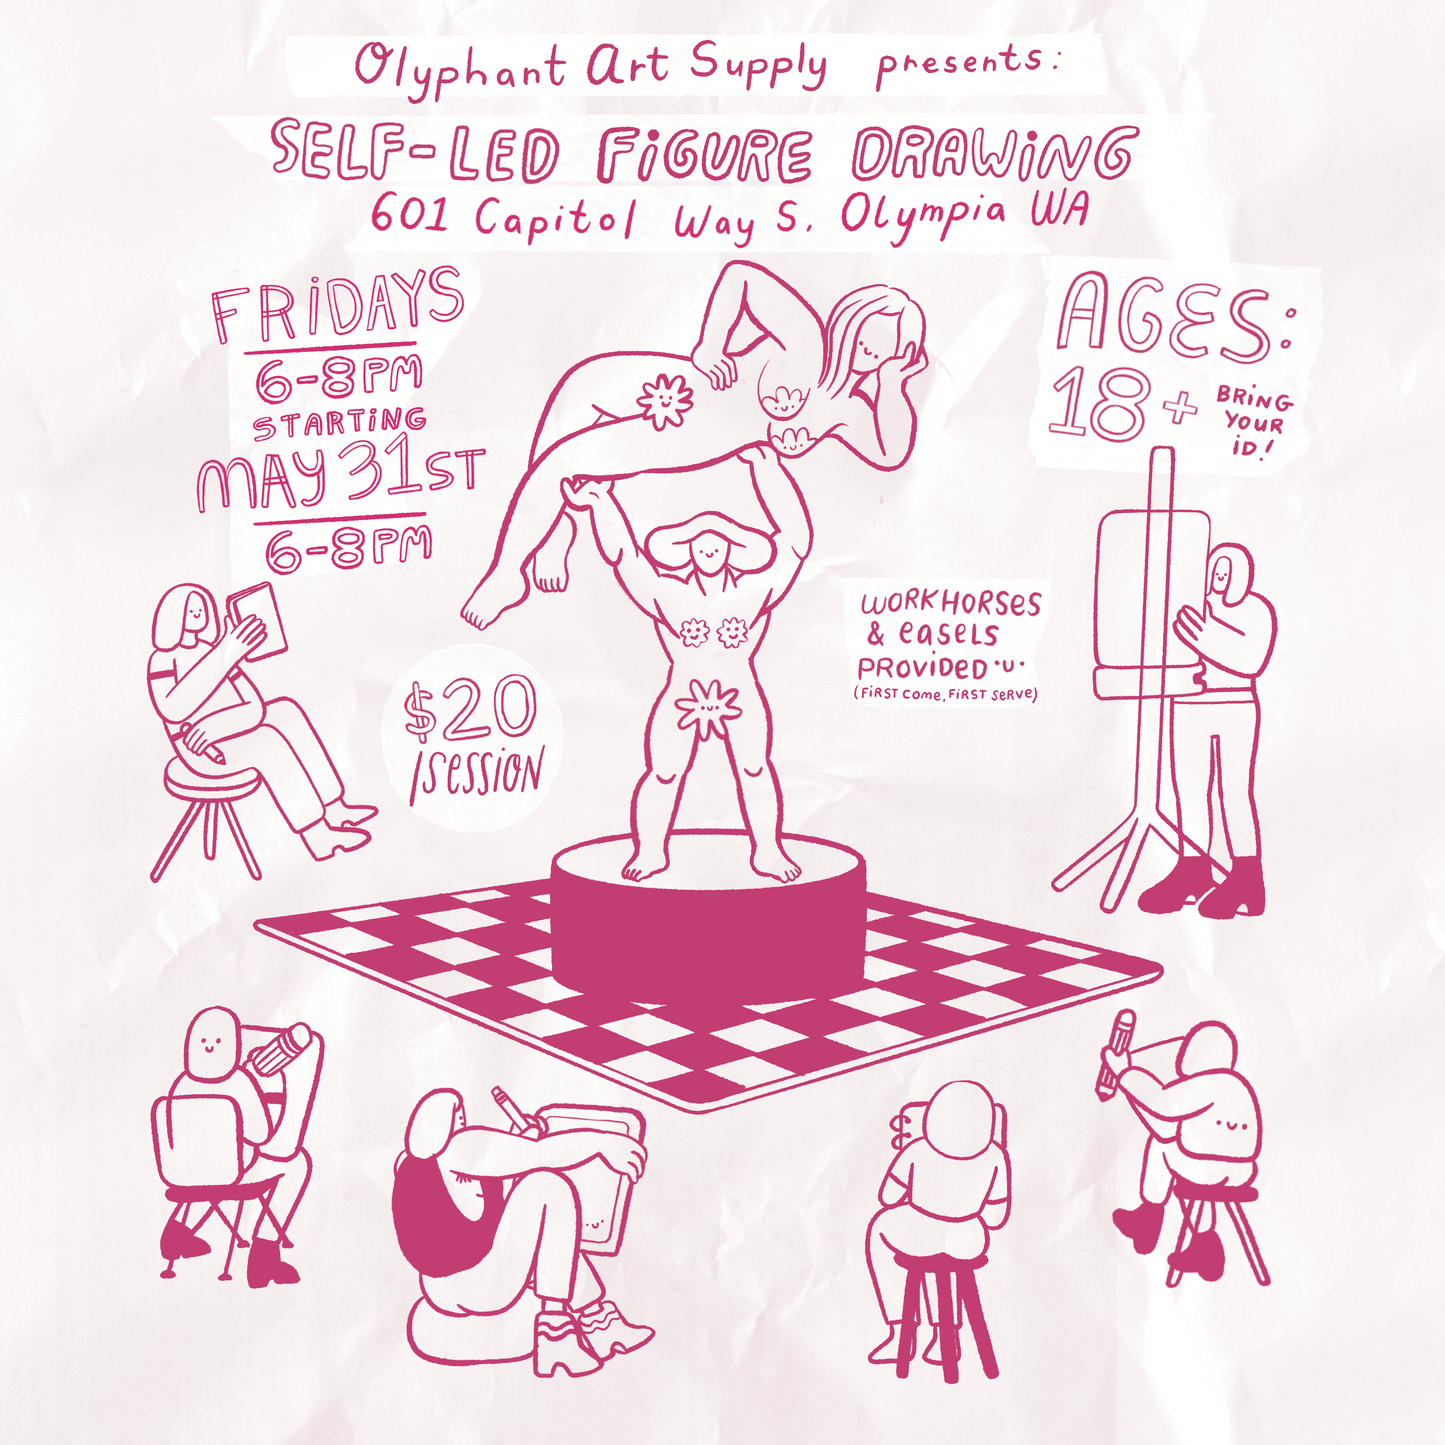 Friday Night Live Figure Drawing Ticket - 18+ Only - Starts May 31st!